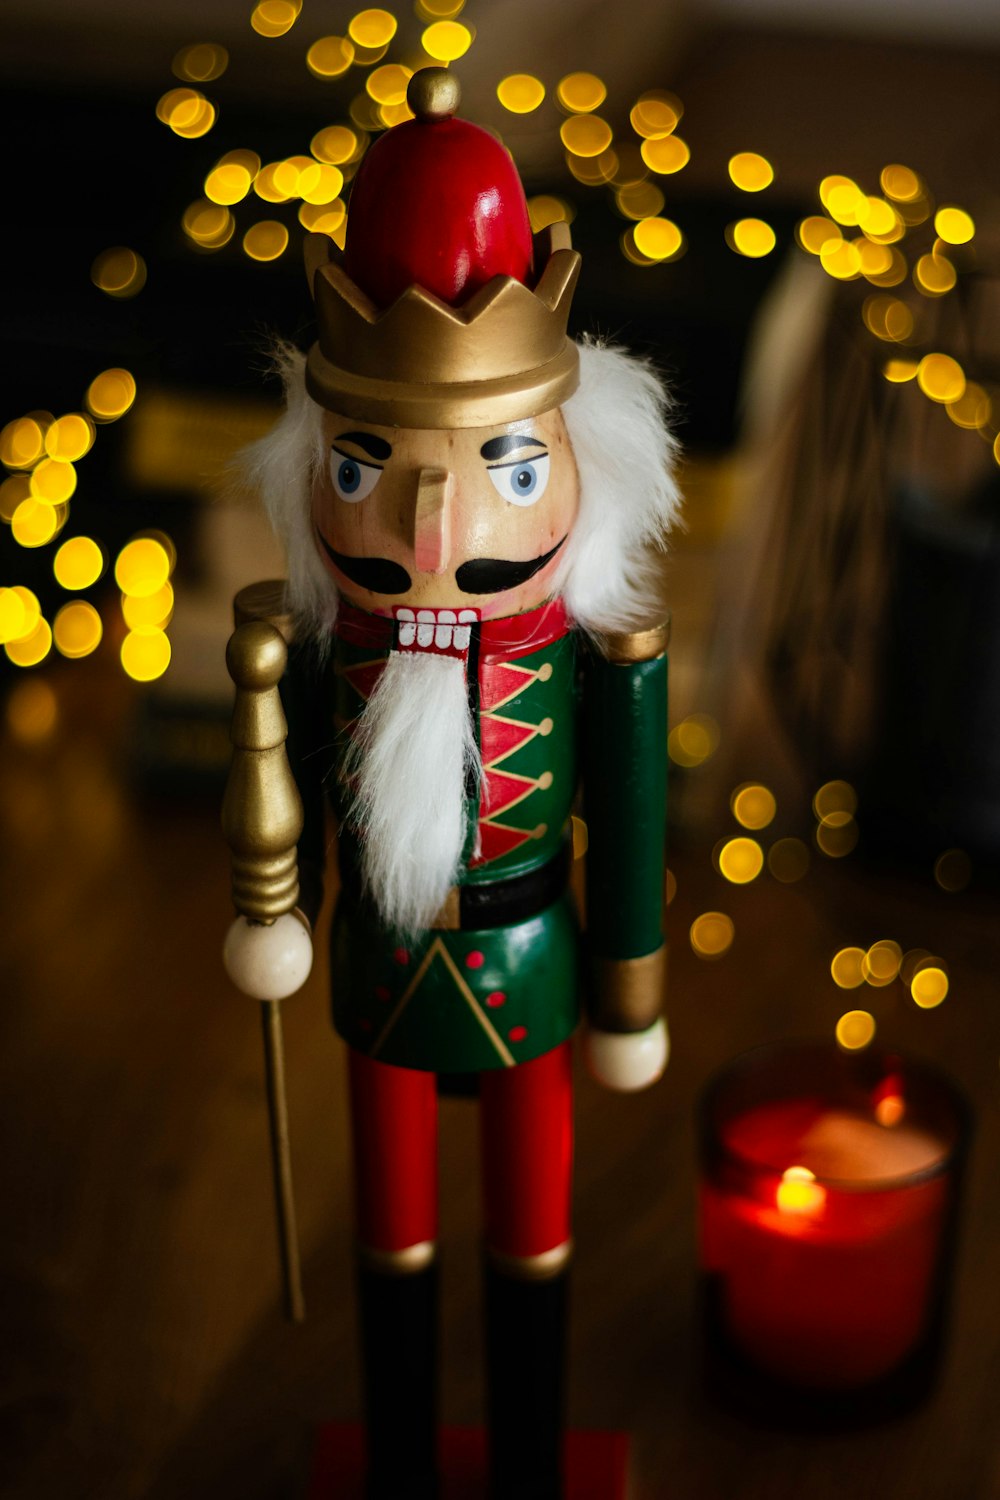 a nutcracker is standing next to a candle